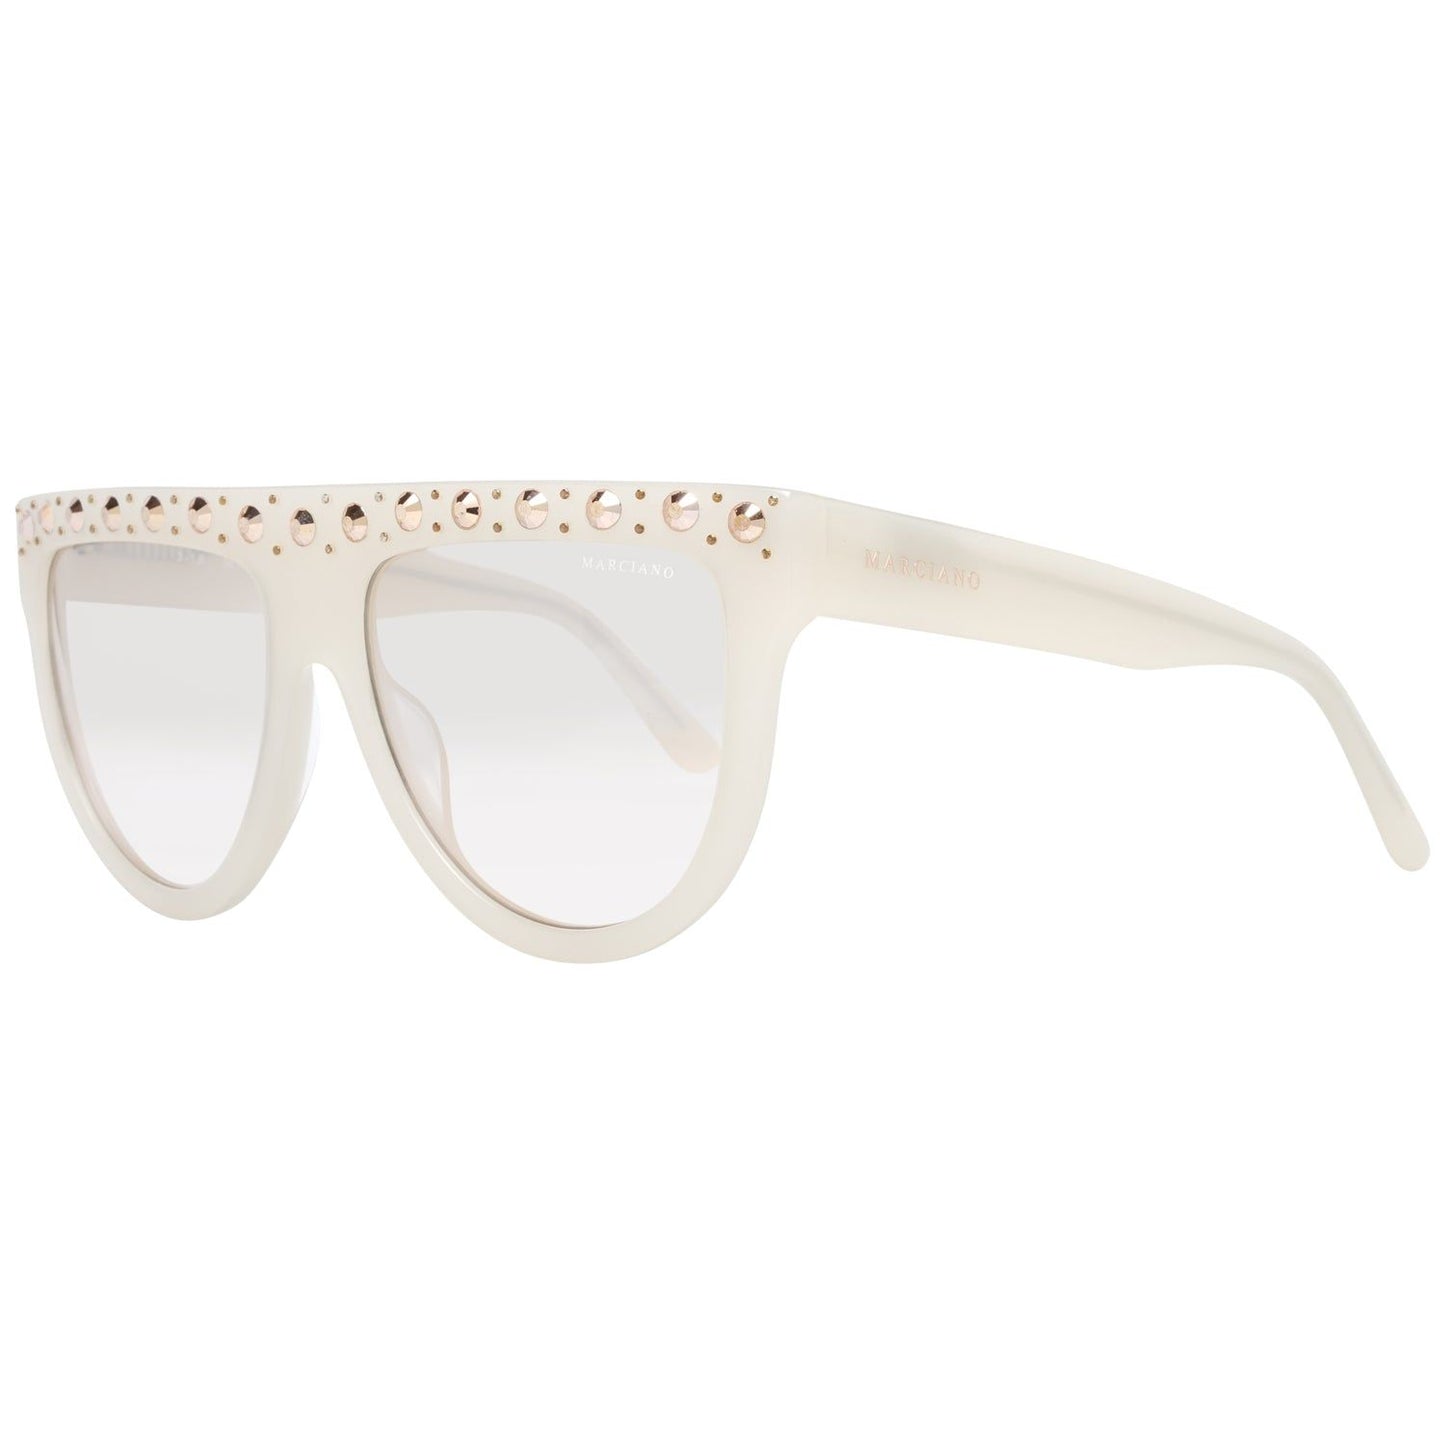 MARCIANO By GUESS SUNGLASSESMARCIANO BY GUESS MOD. GM0795 5625FMcRichard Designer Brands£118.00